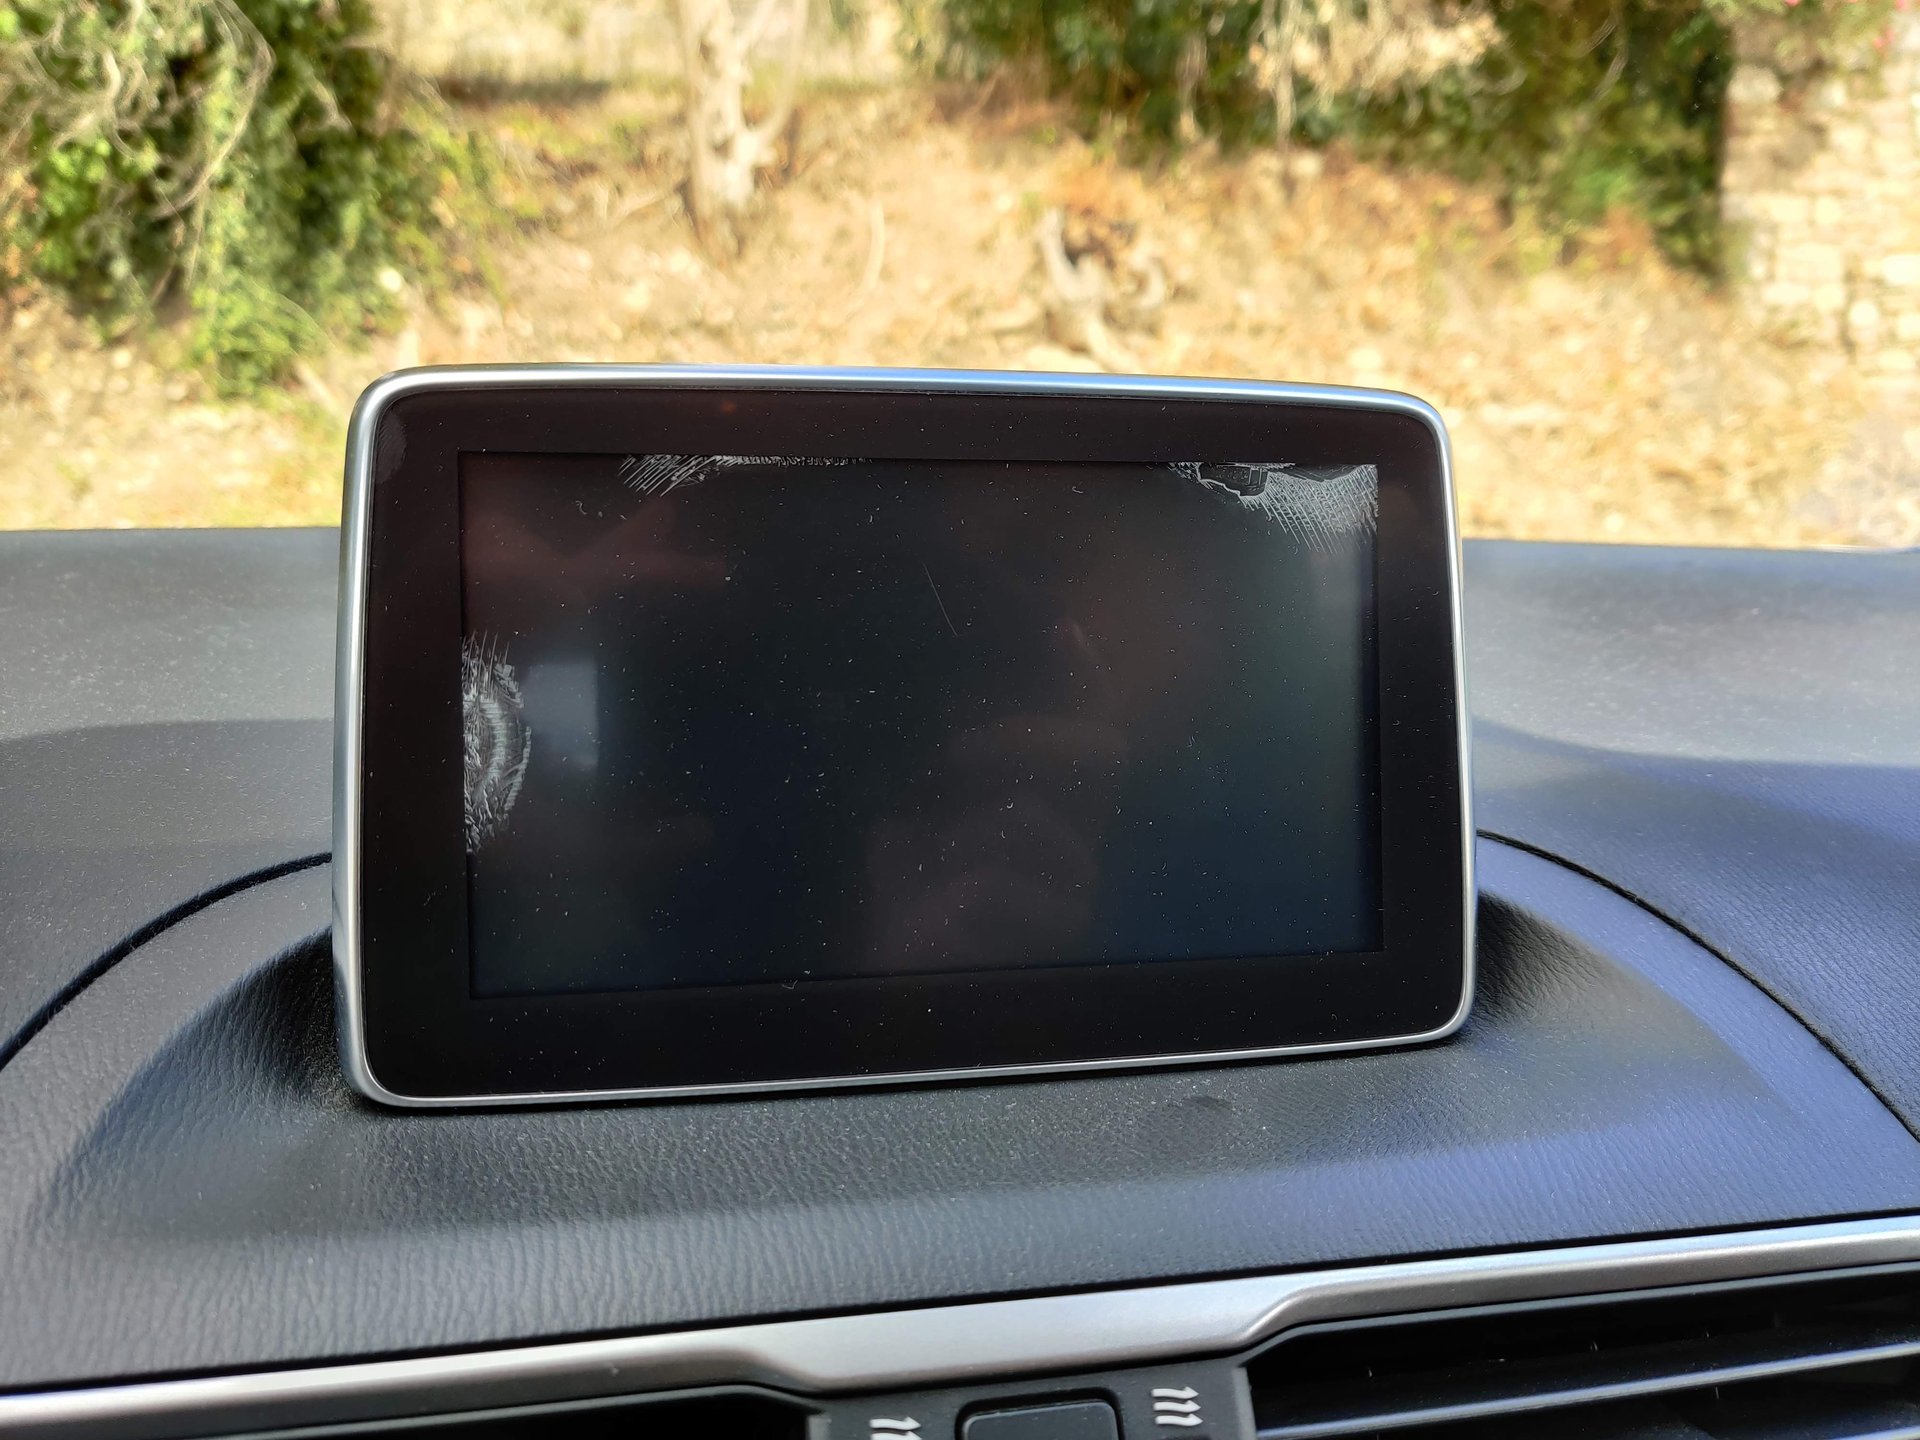 Mazda CONNECT Screen Replacement Service in Wilton Manors FL - 786-355-7660